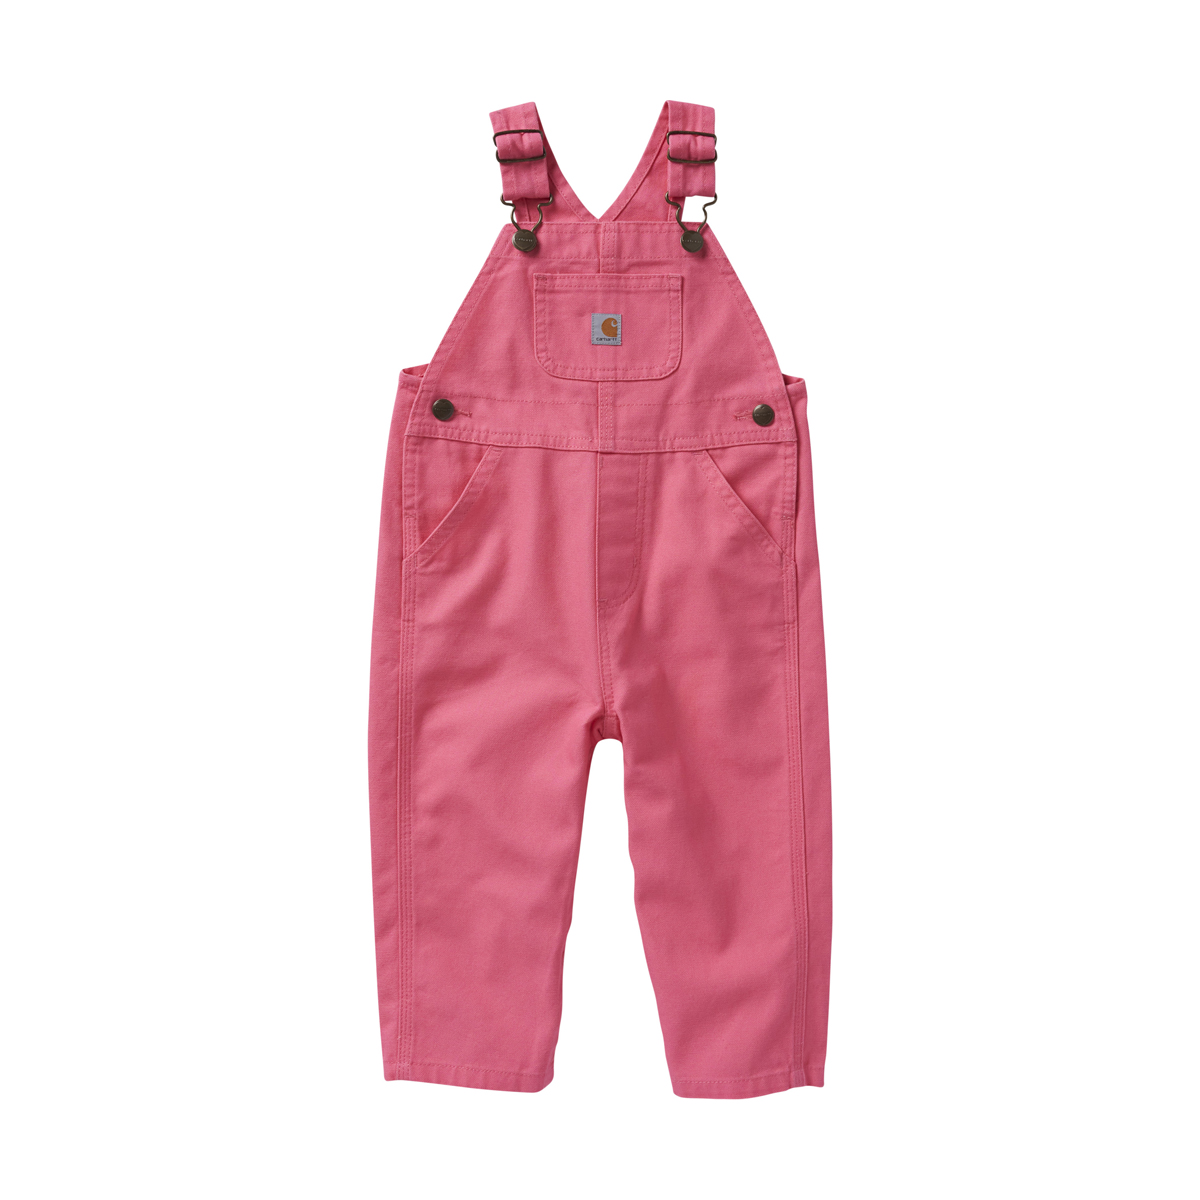 Carhartt Loose Fit Canvas Bib Overall - Pink